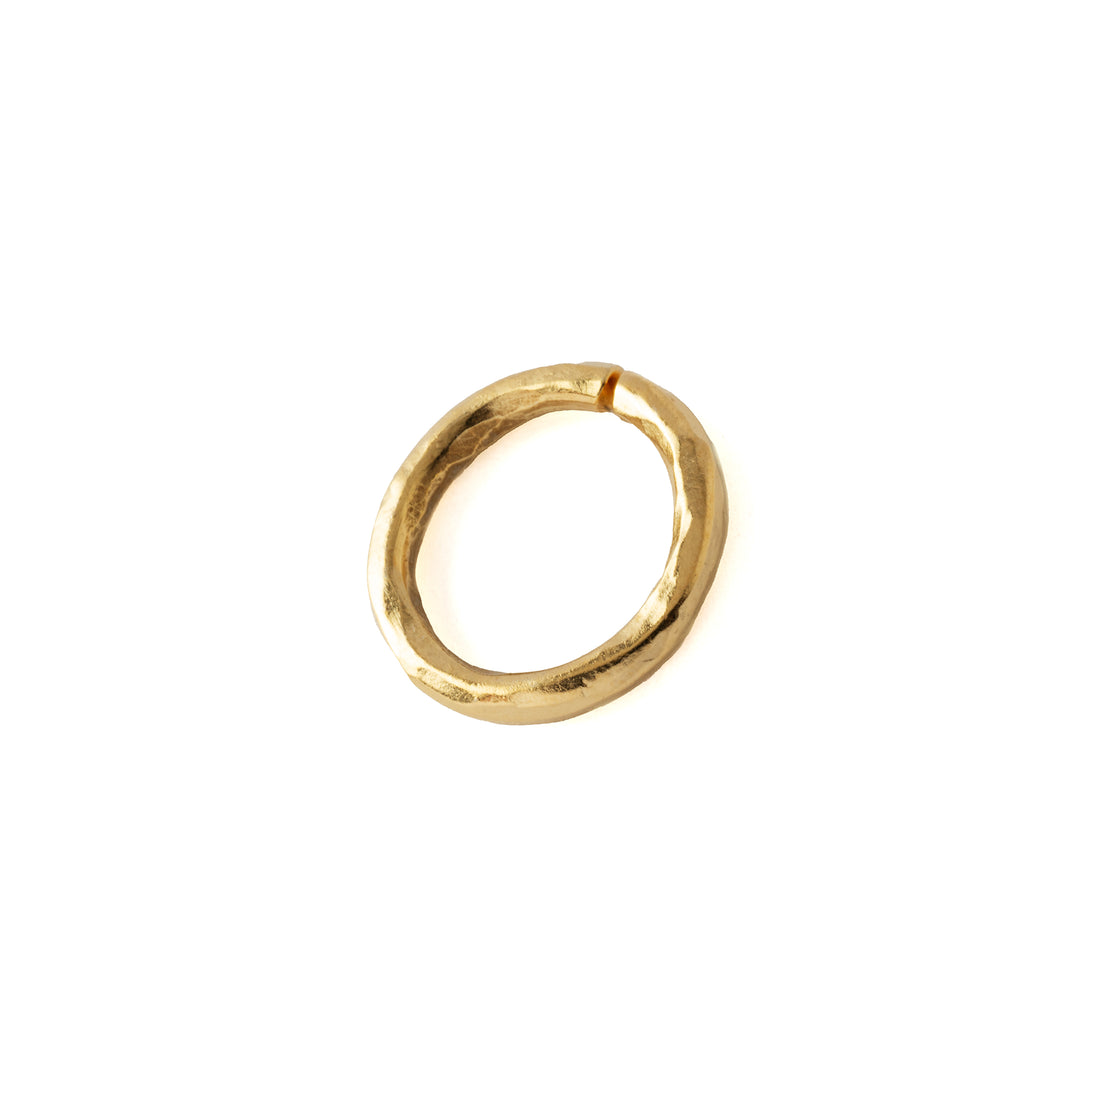 Hammered Gold Piercing Ring right side view